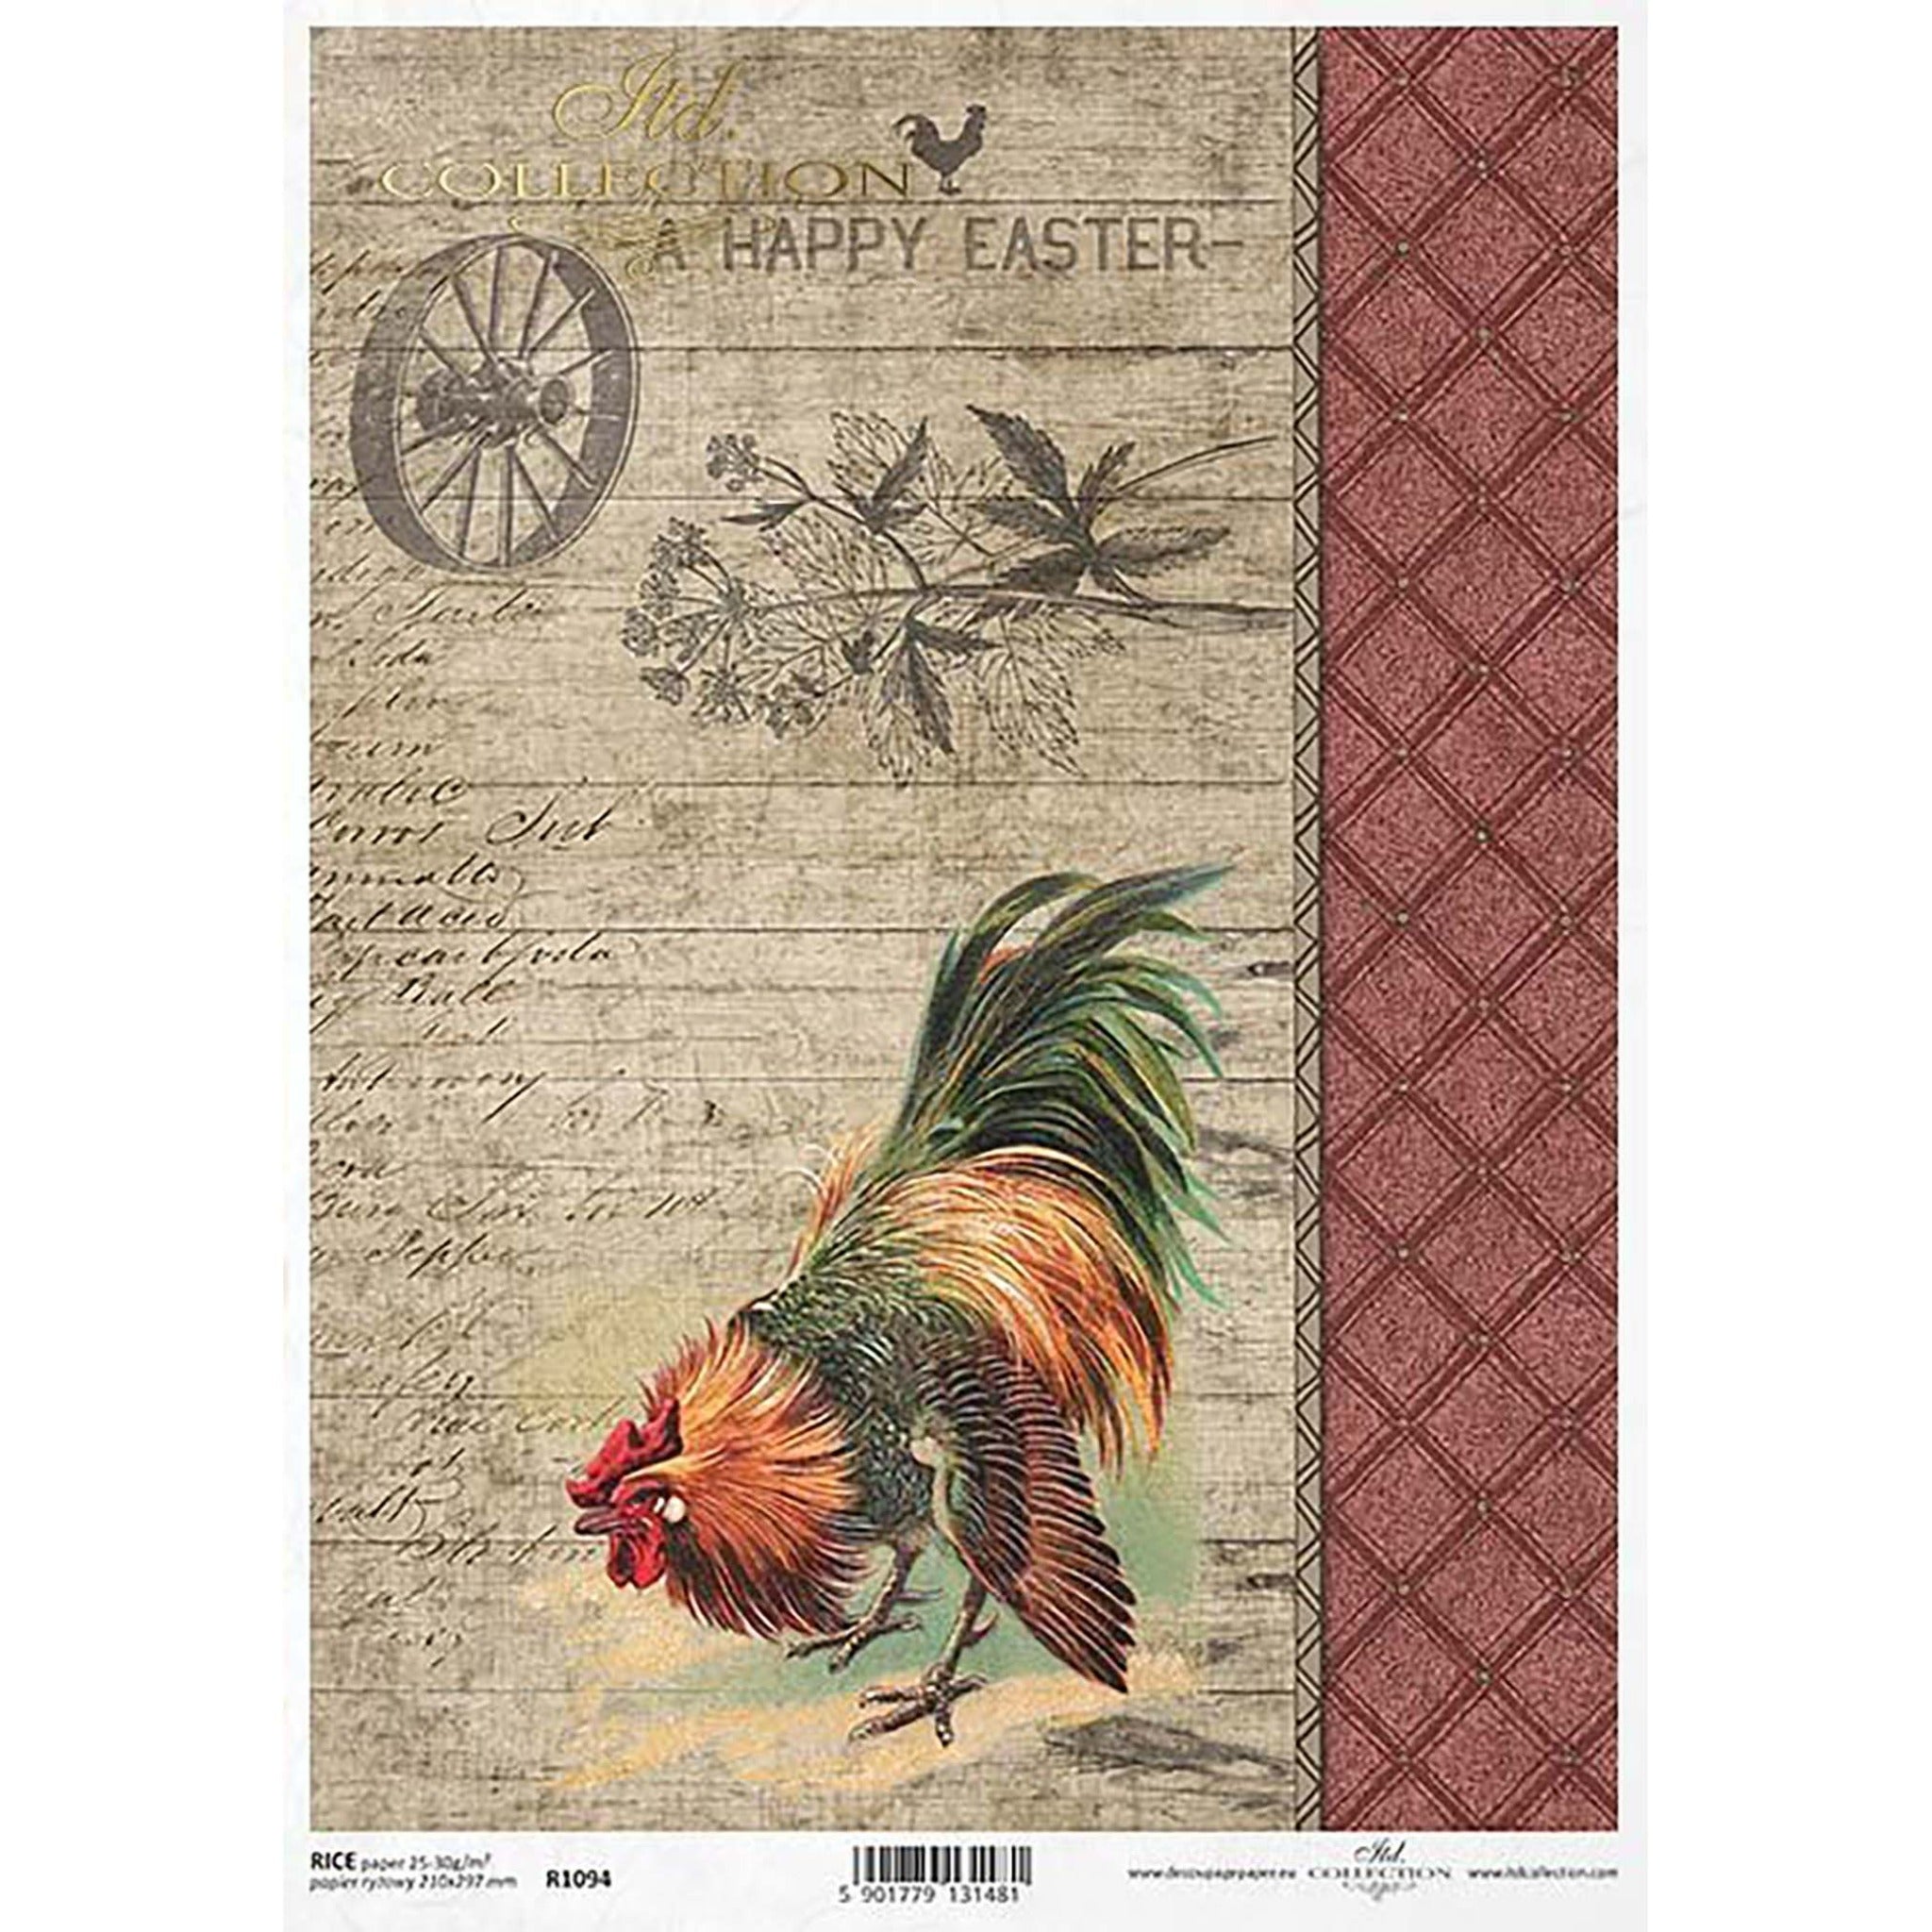 A4 rice paper design that features a rooster against a wood background that says: A Happy Easter. On the right side of the design is a repeating red diamond pattern.